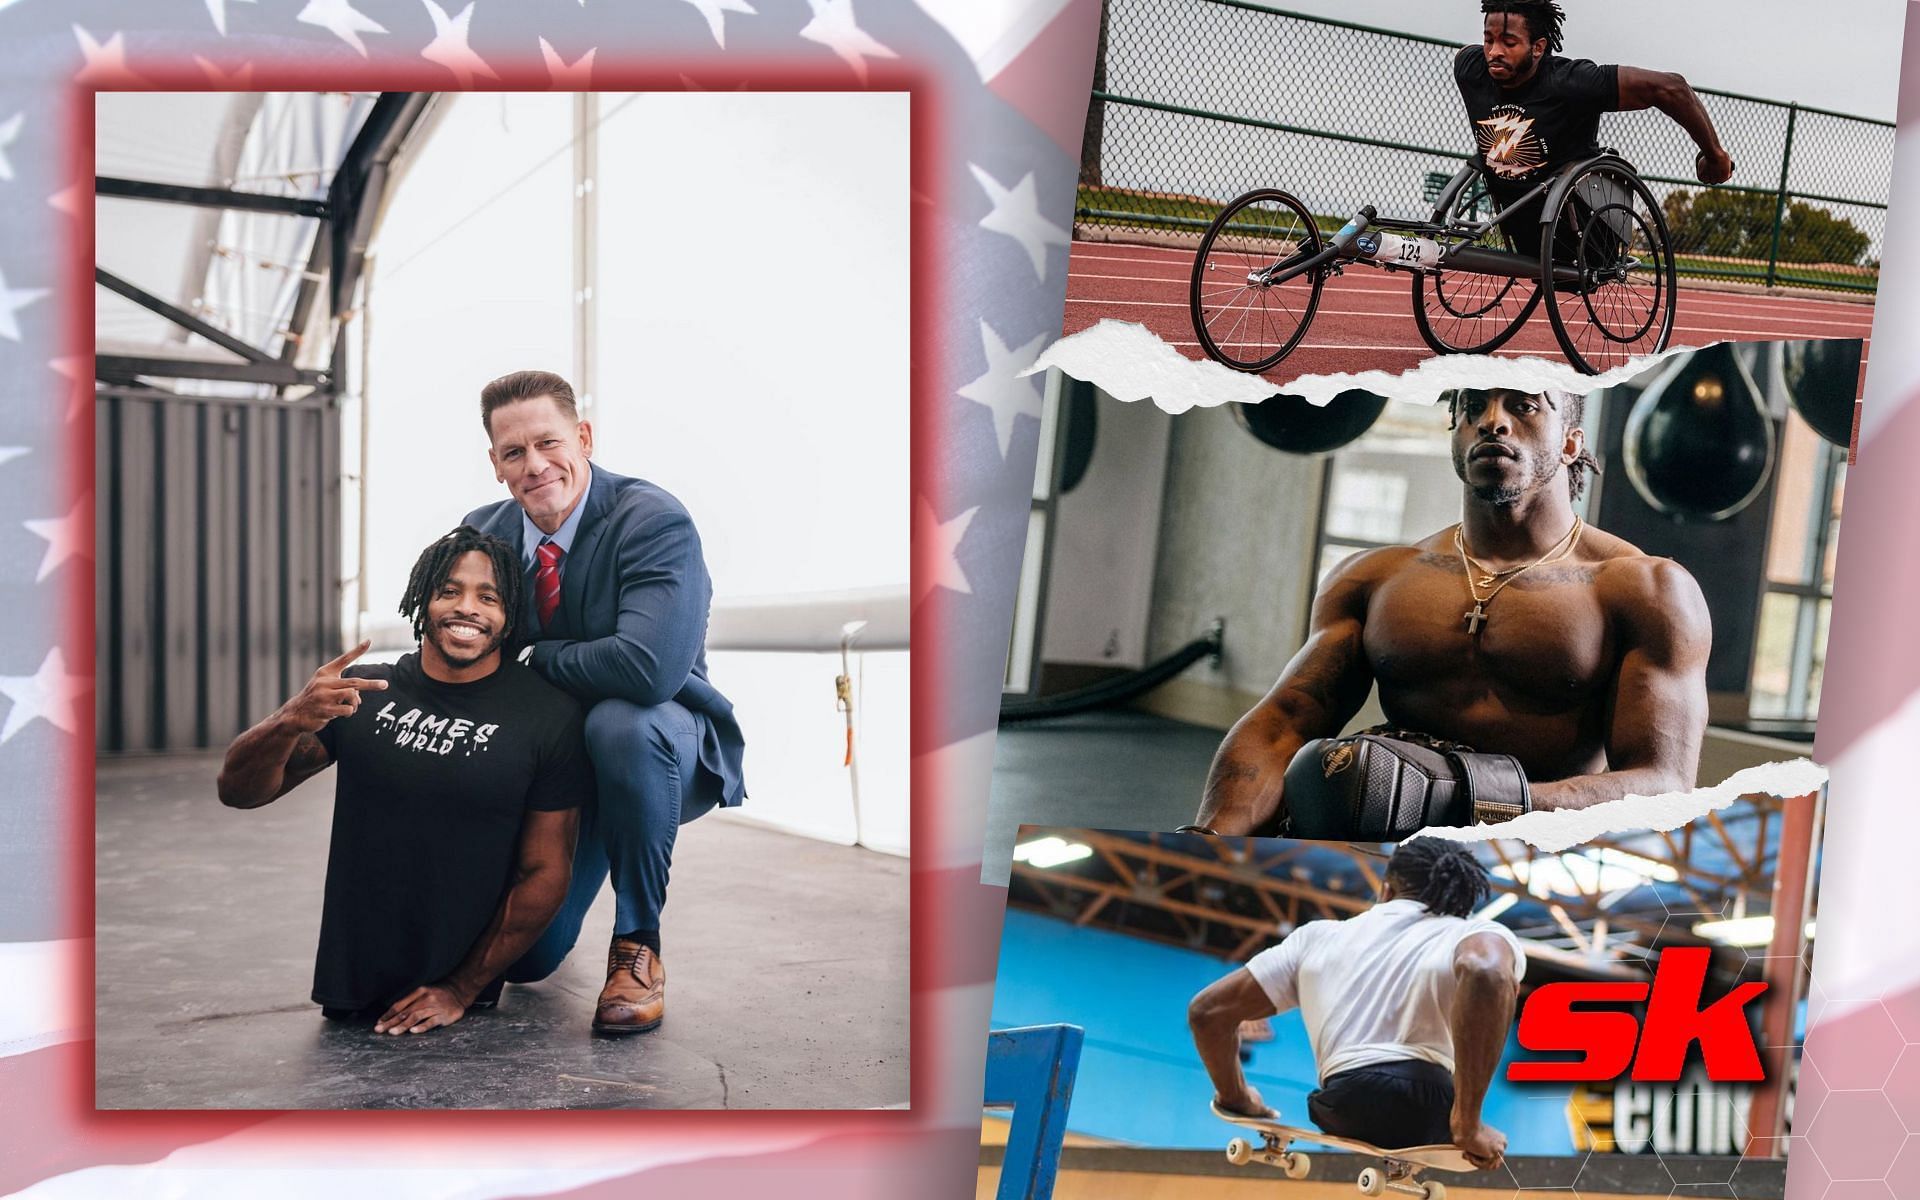 Zion Clark poses with John Cena; Zion Clark wheelchair racing, boxing, skating